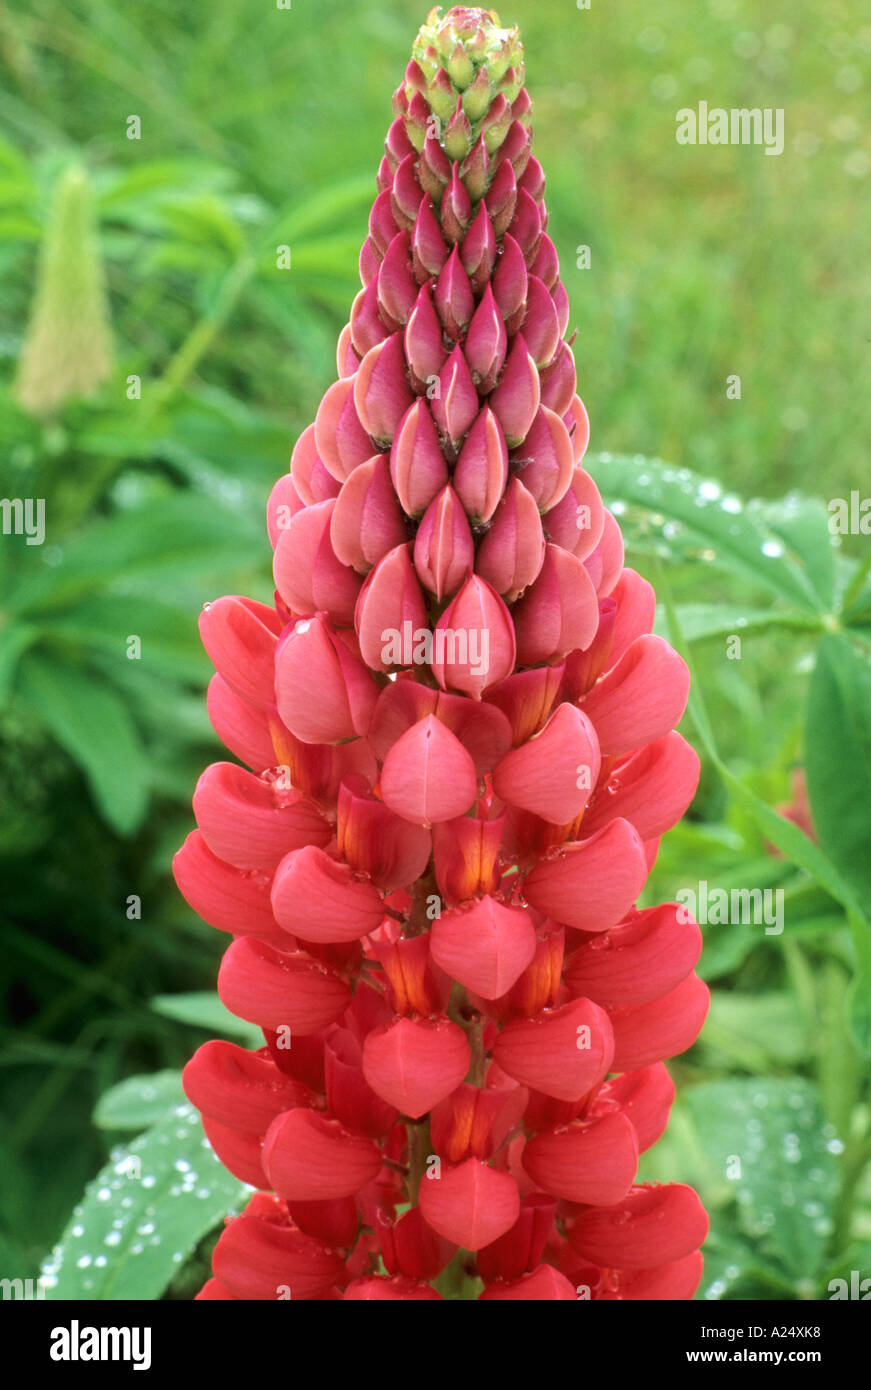 Lupinus 'Red Arrow', lupin, red pink coloured flower spike, garden plant, horticulture, detail, close up lupins Stock Photo